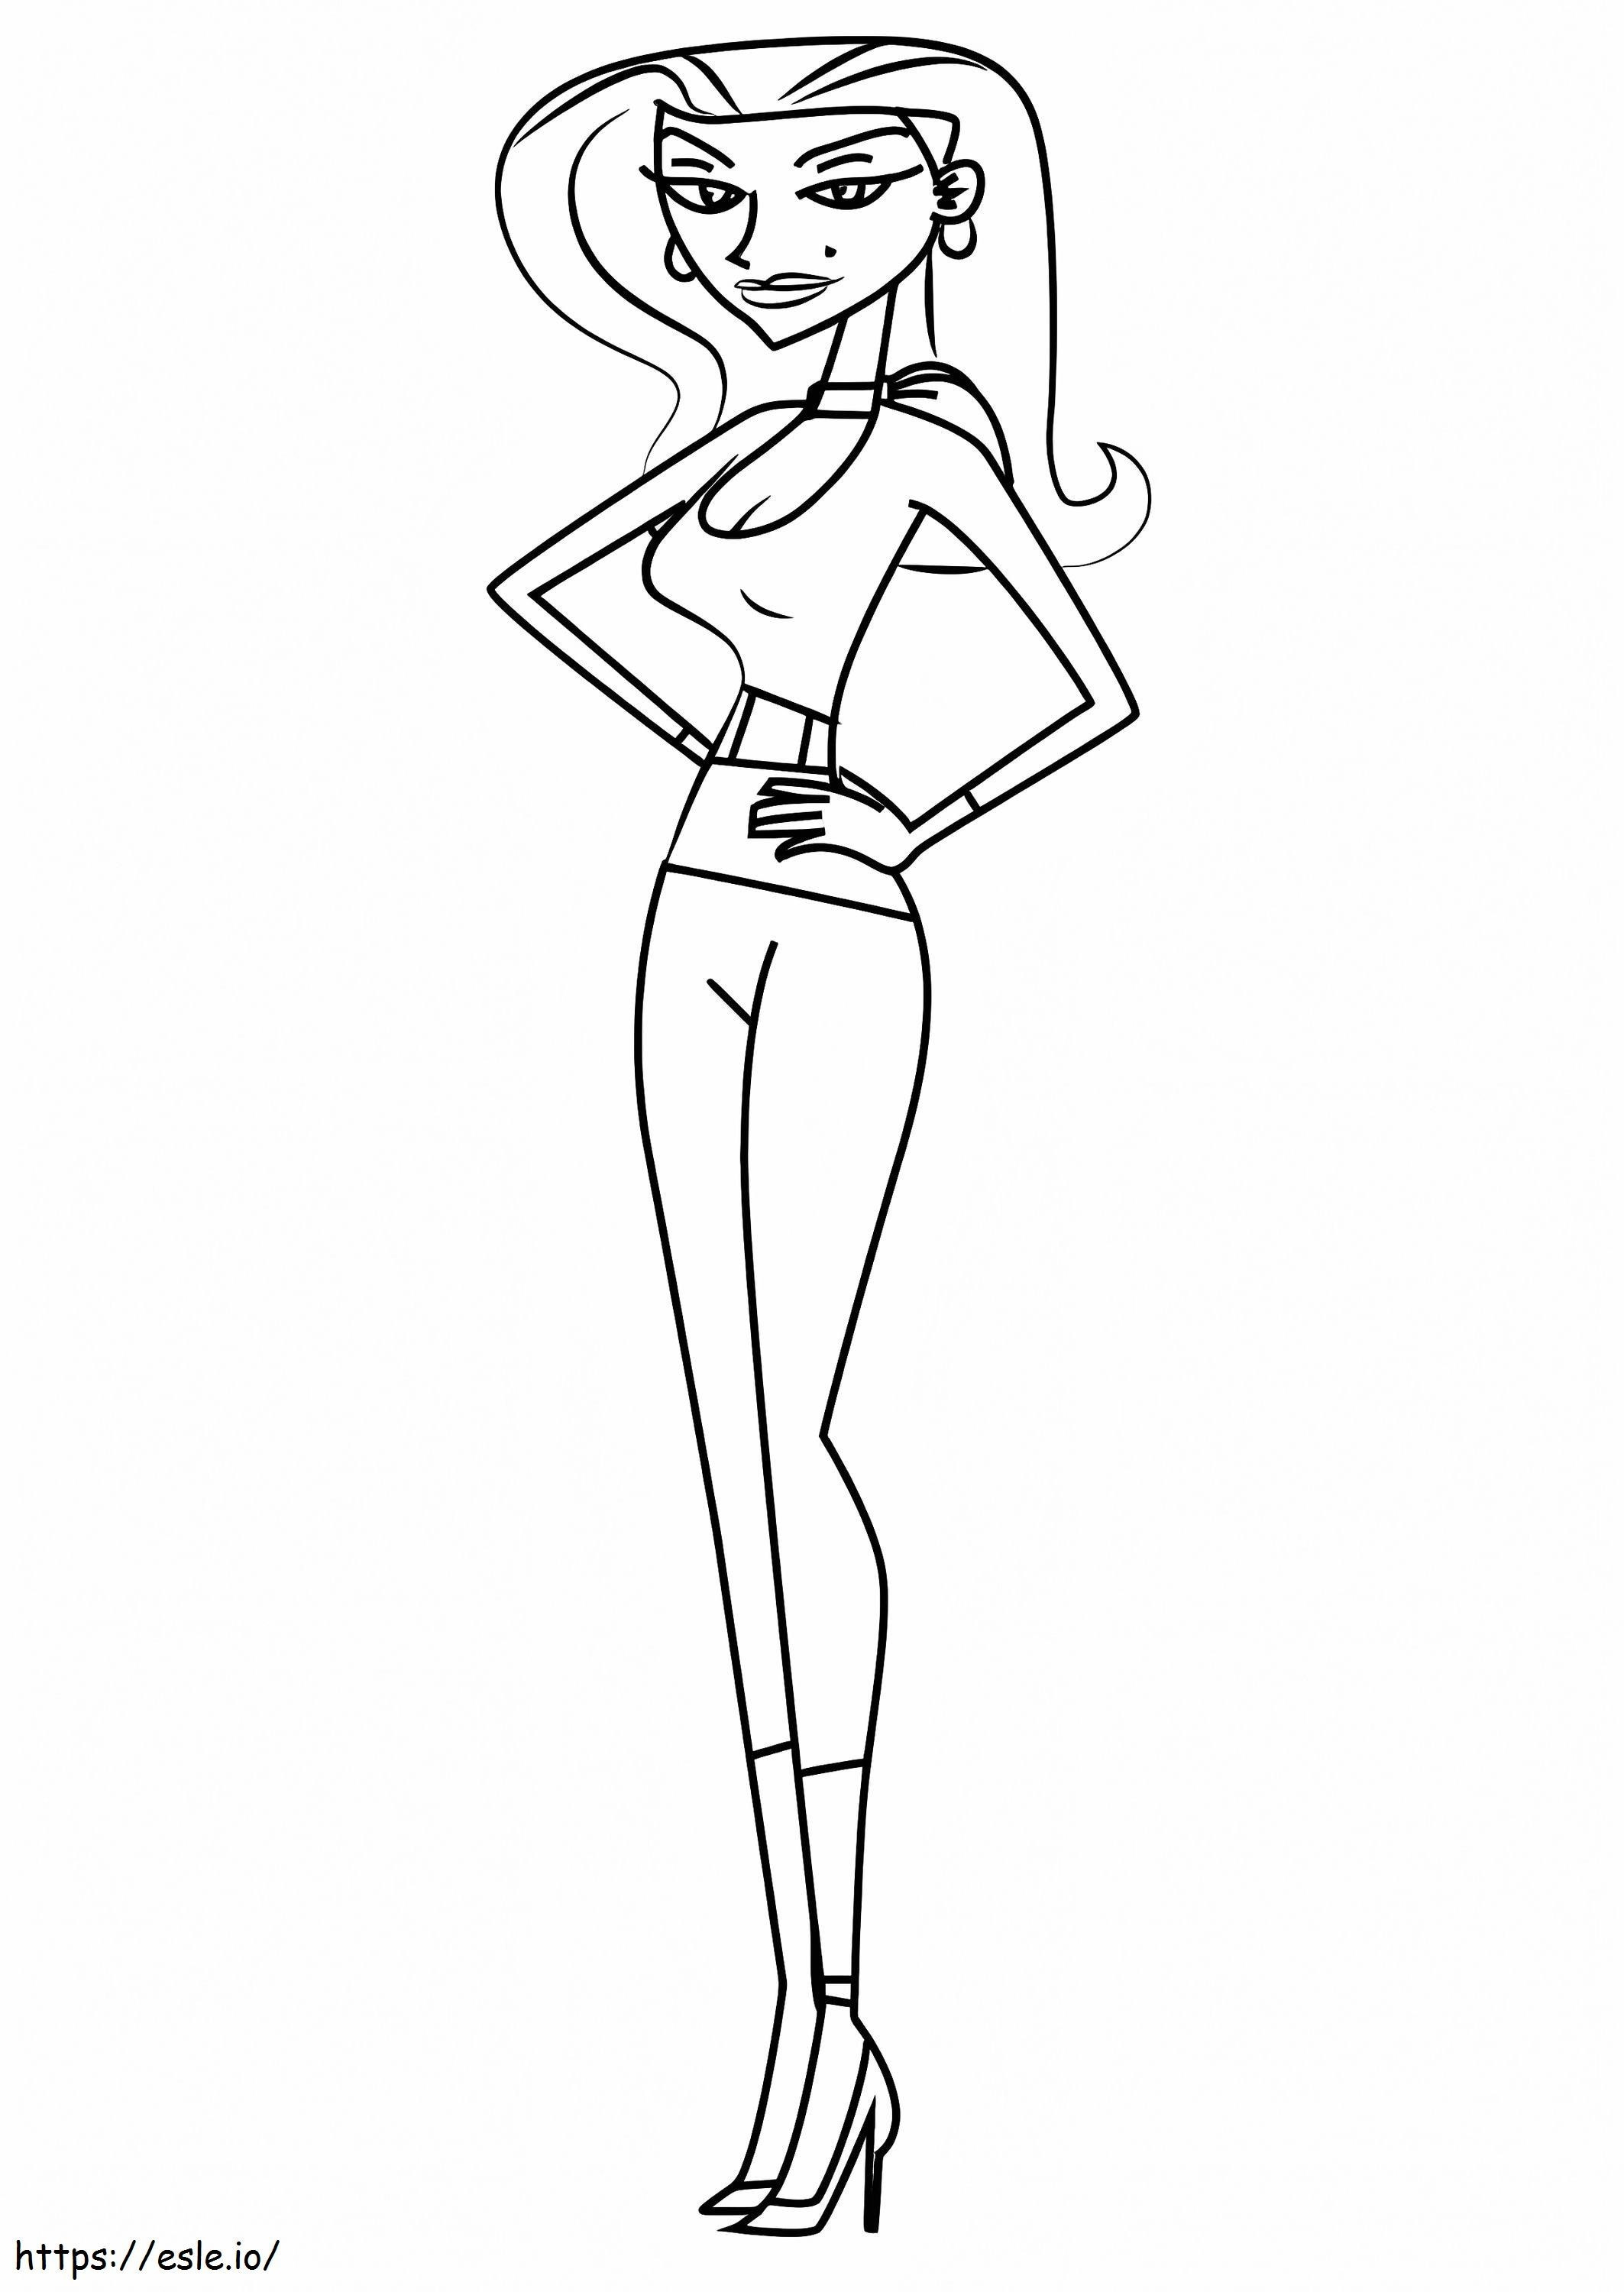 Yummy Mummy From 6Teen coloring page